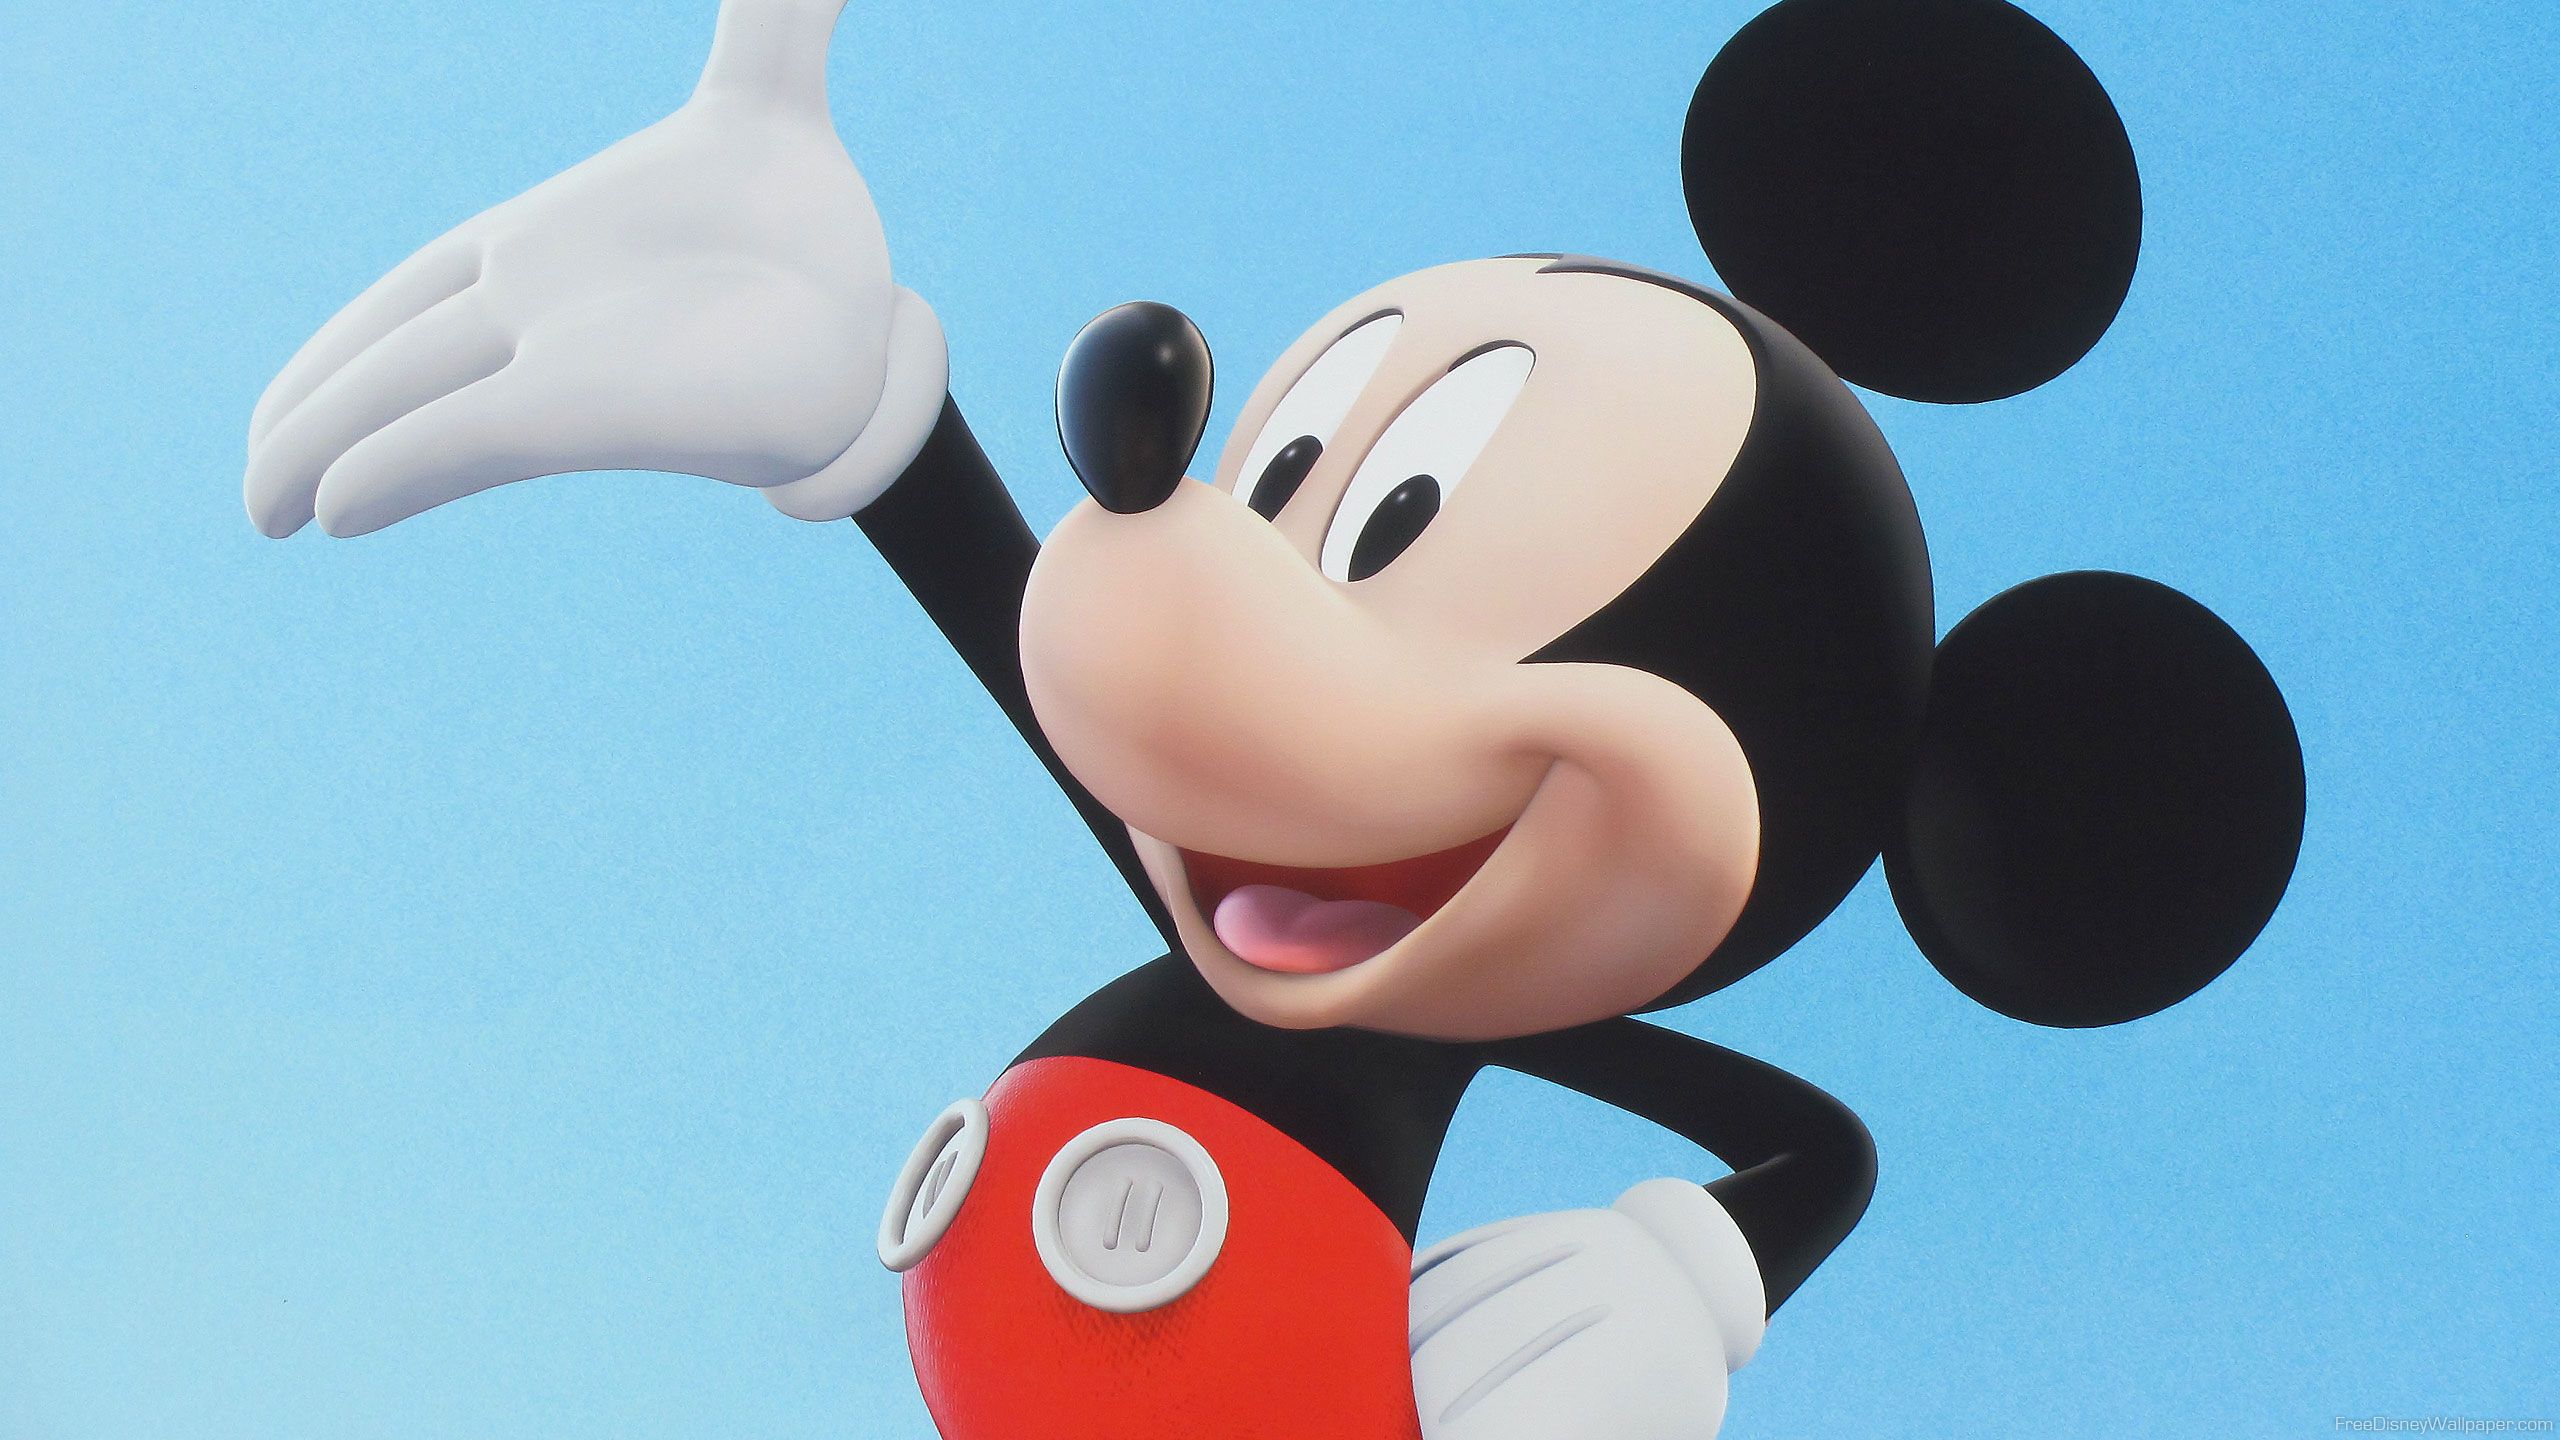 Free download Mickey Mouse Wallpapers HD 